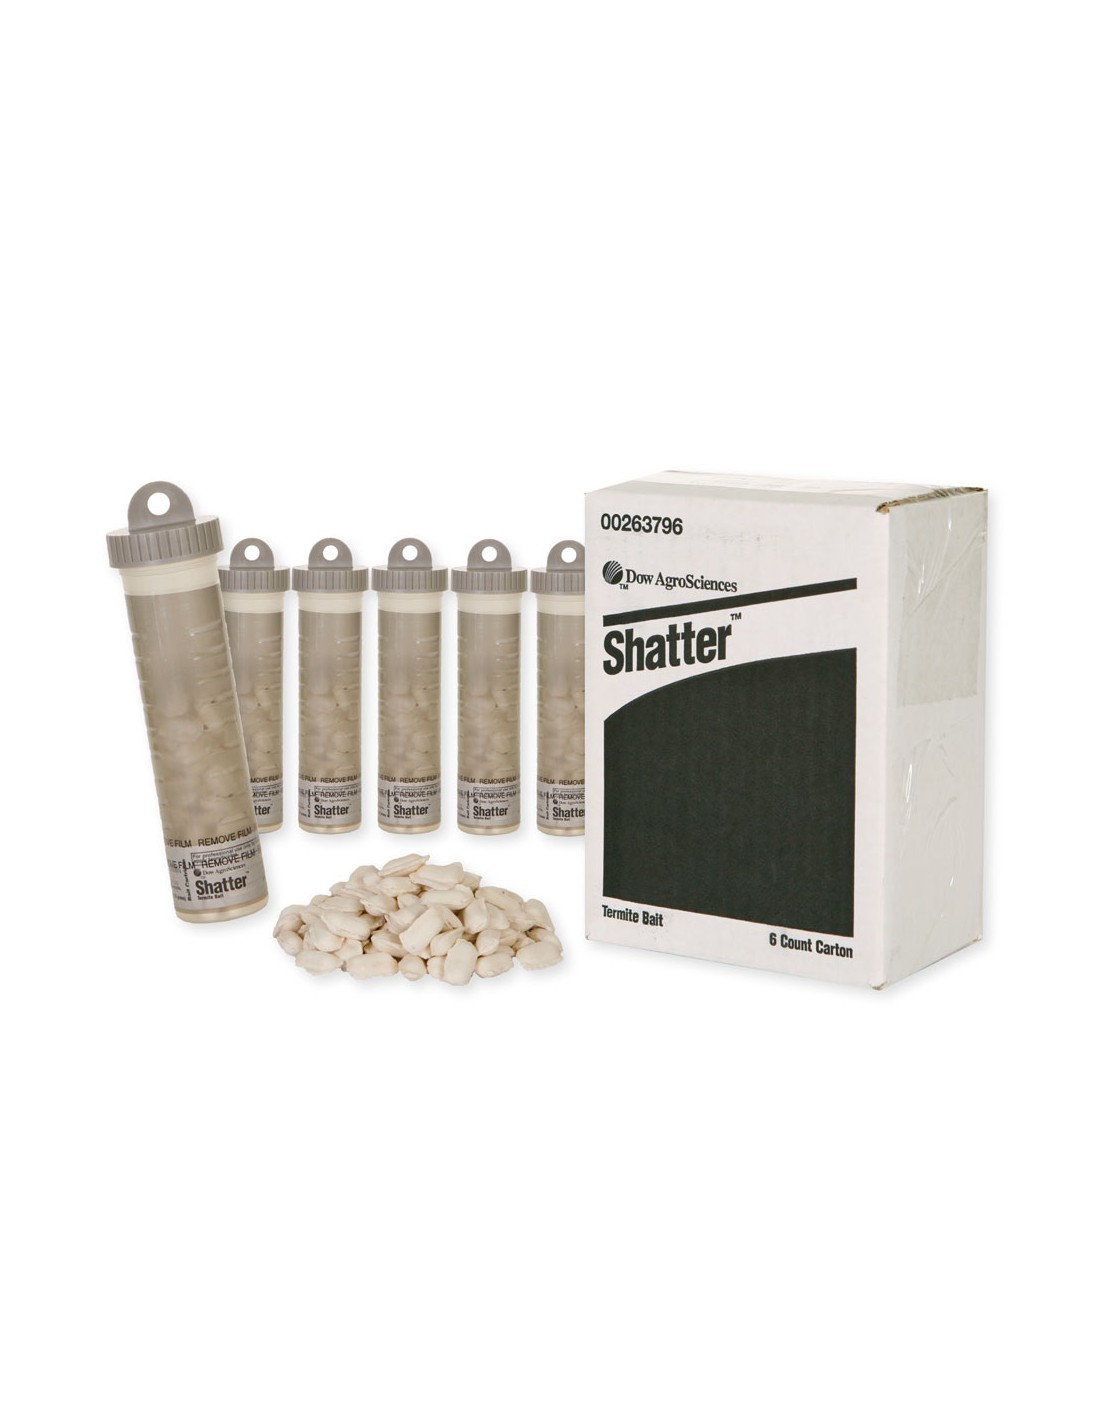 Shatter Termite Bait Cartridge Questions & Answers